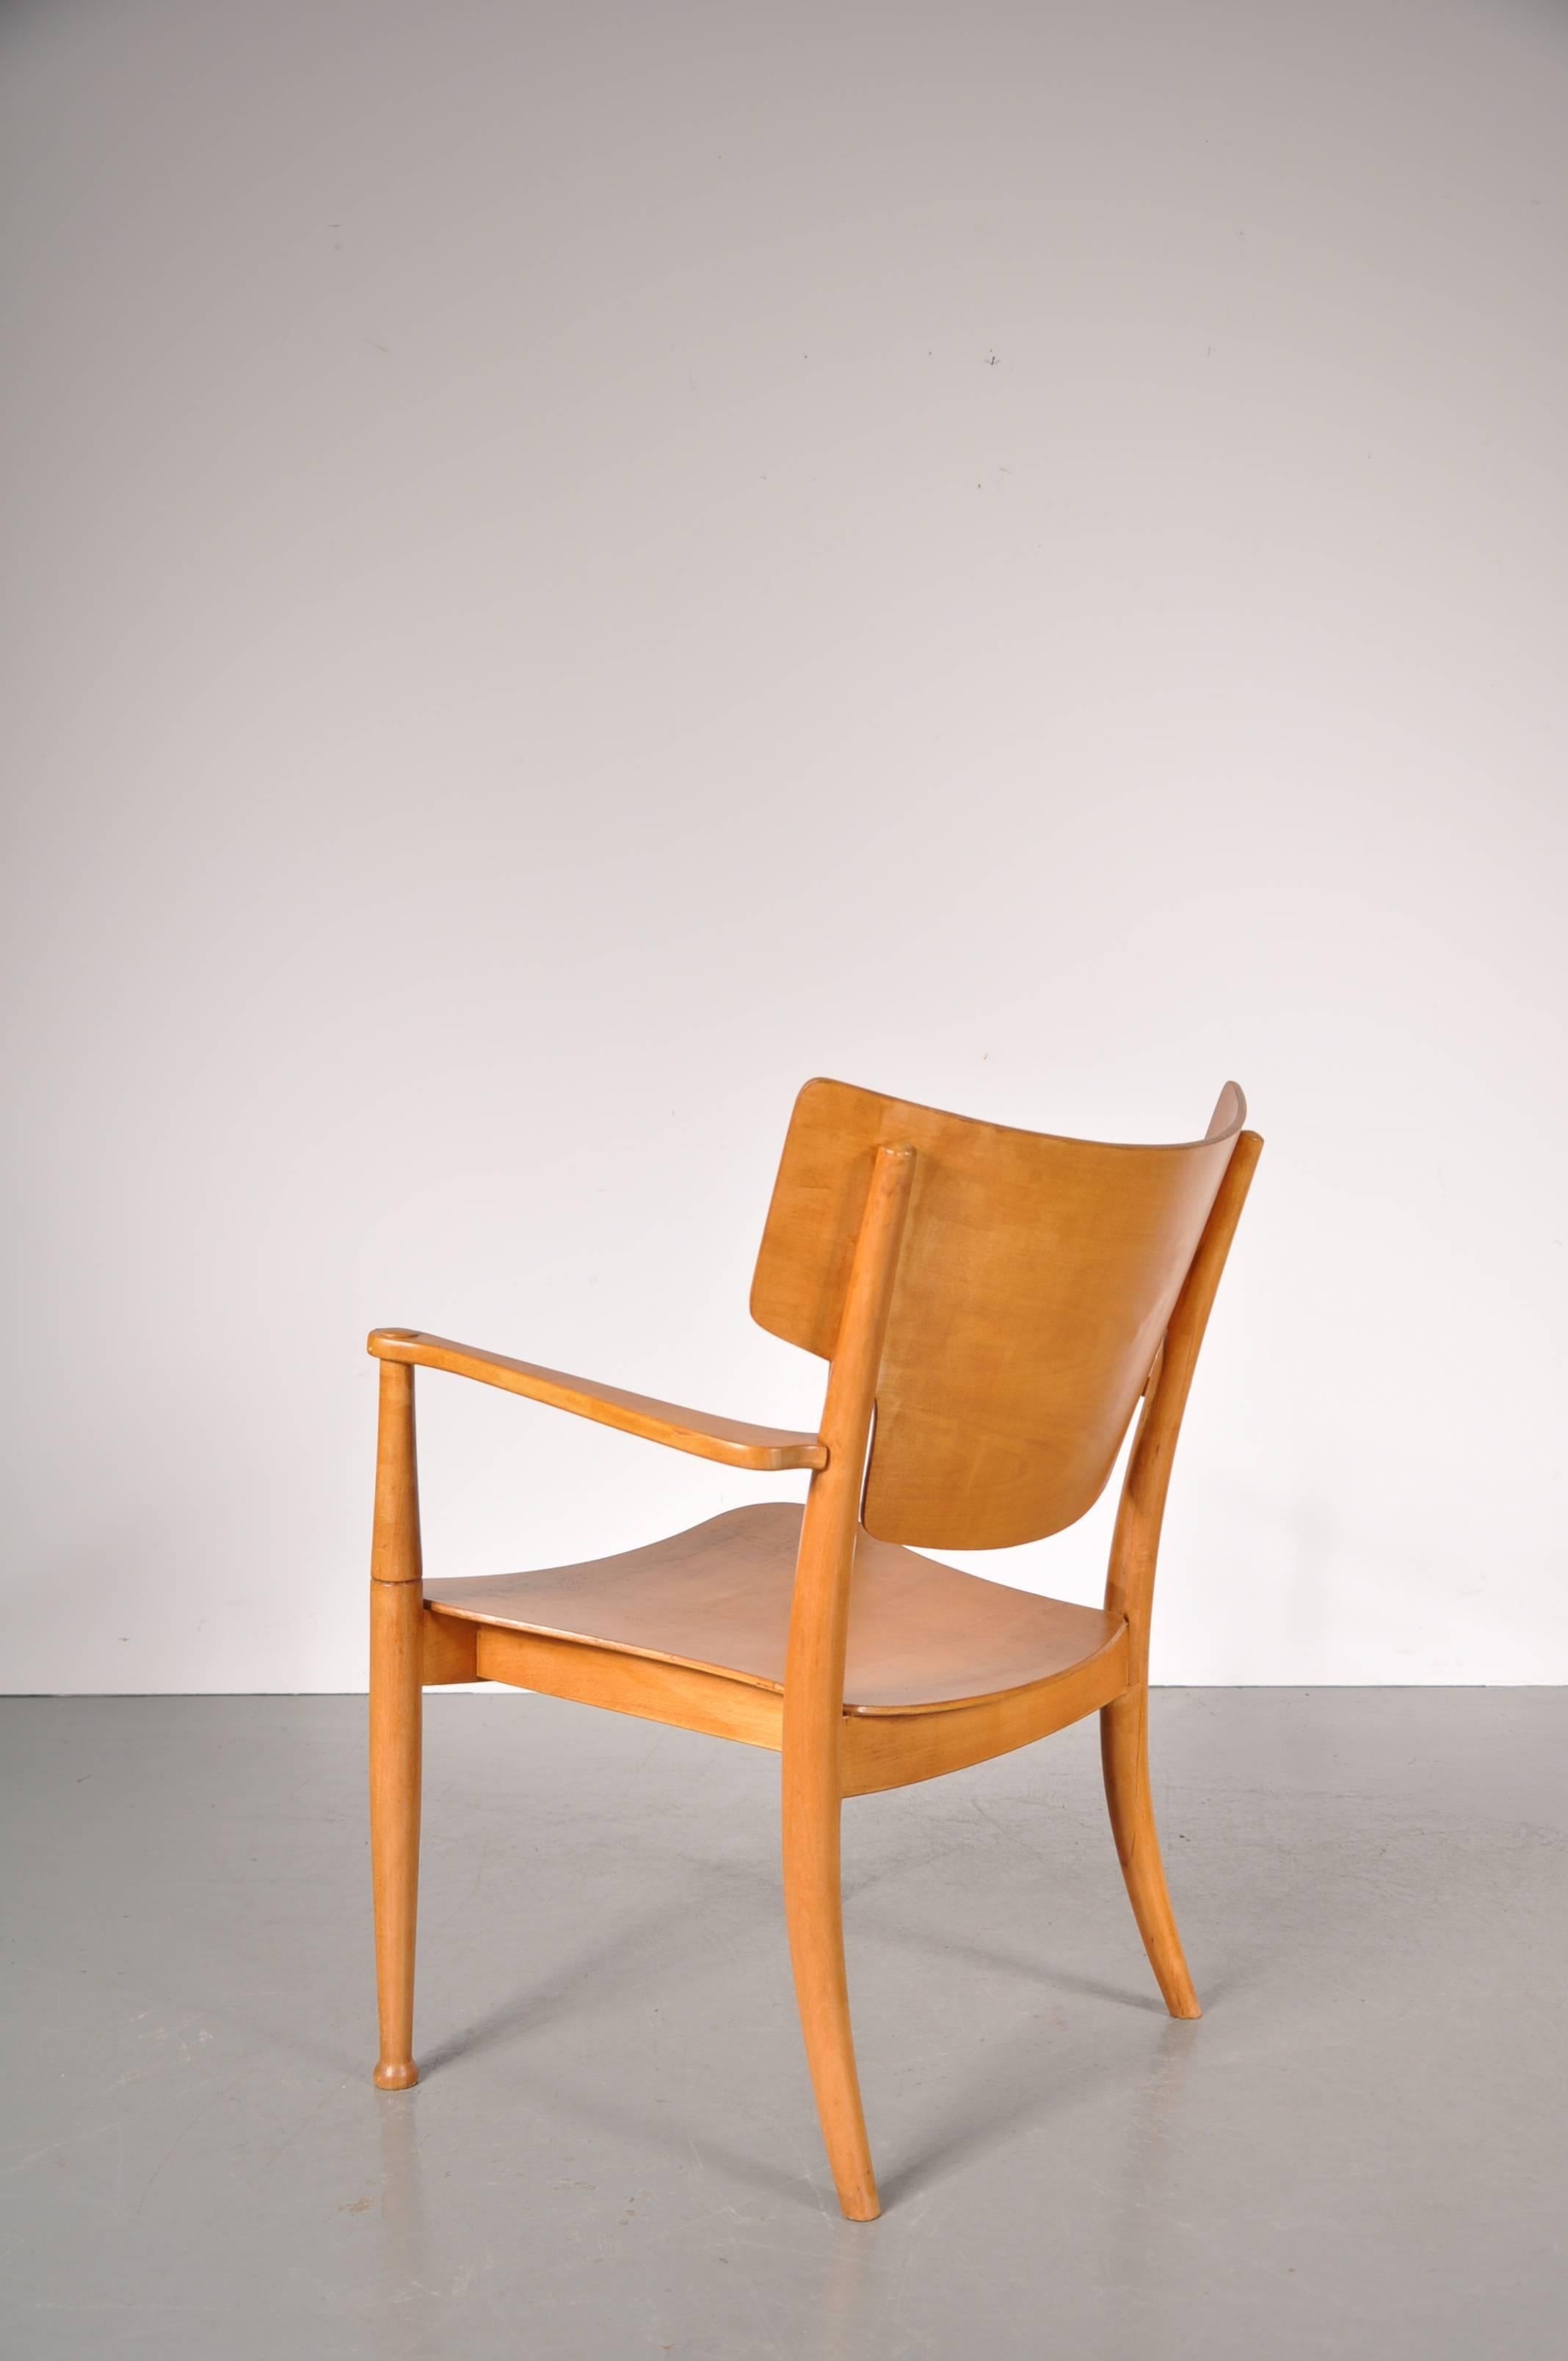 Danish 2 Portex Easy Chairs by Peter Hvidt and Orla Molgaard-Nielsen, circa 1940